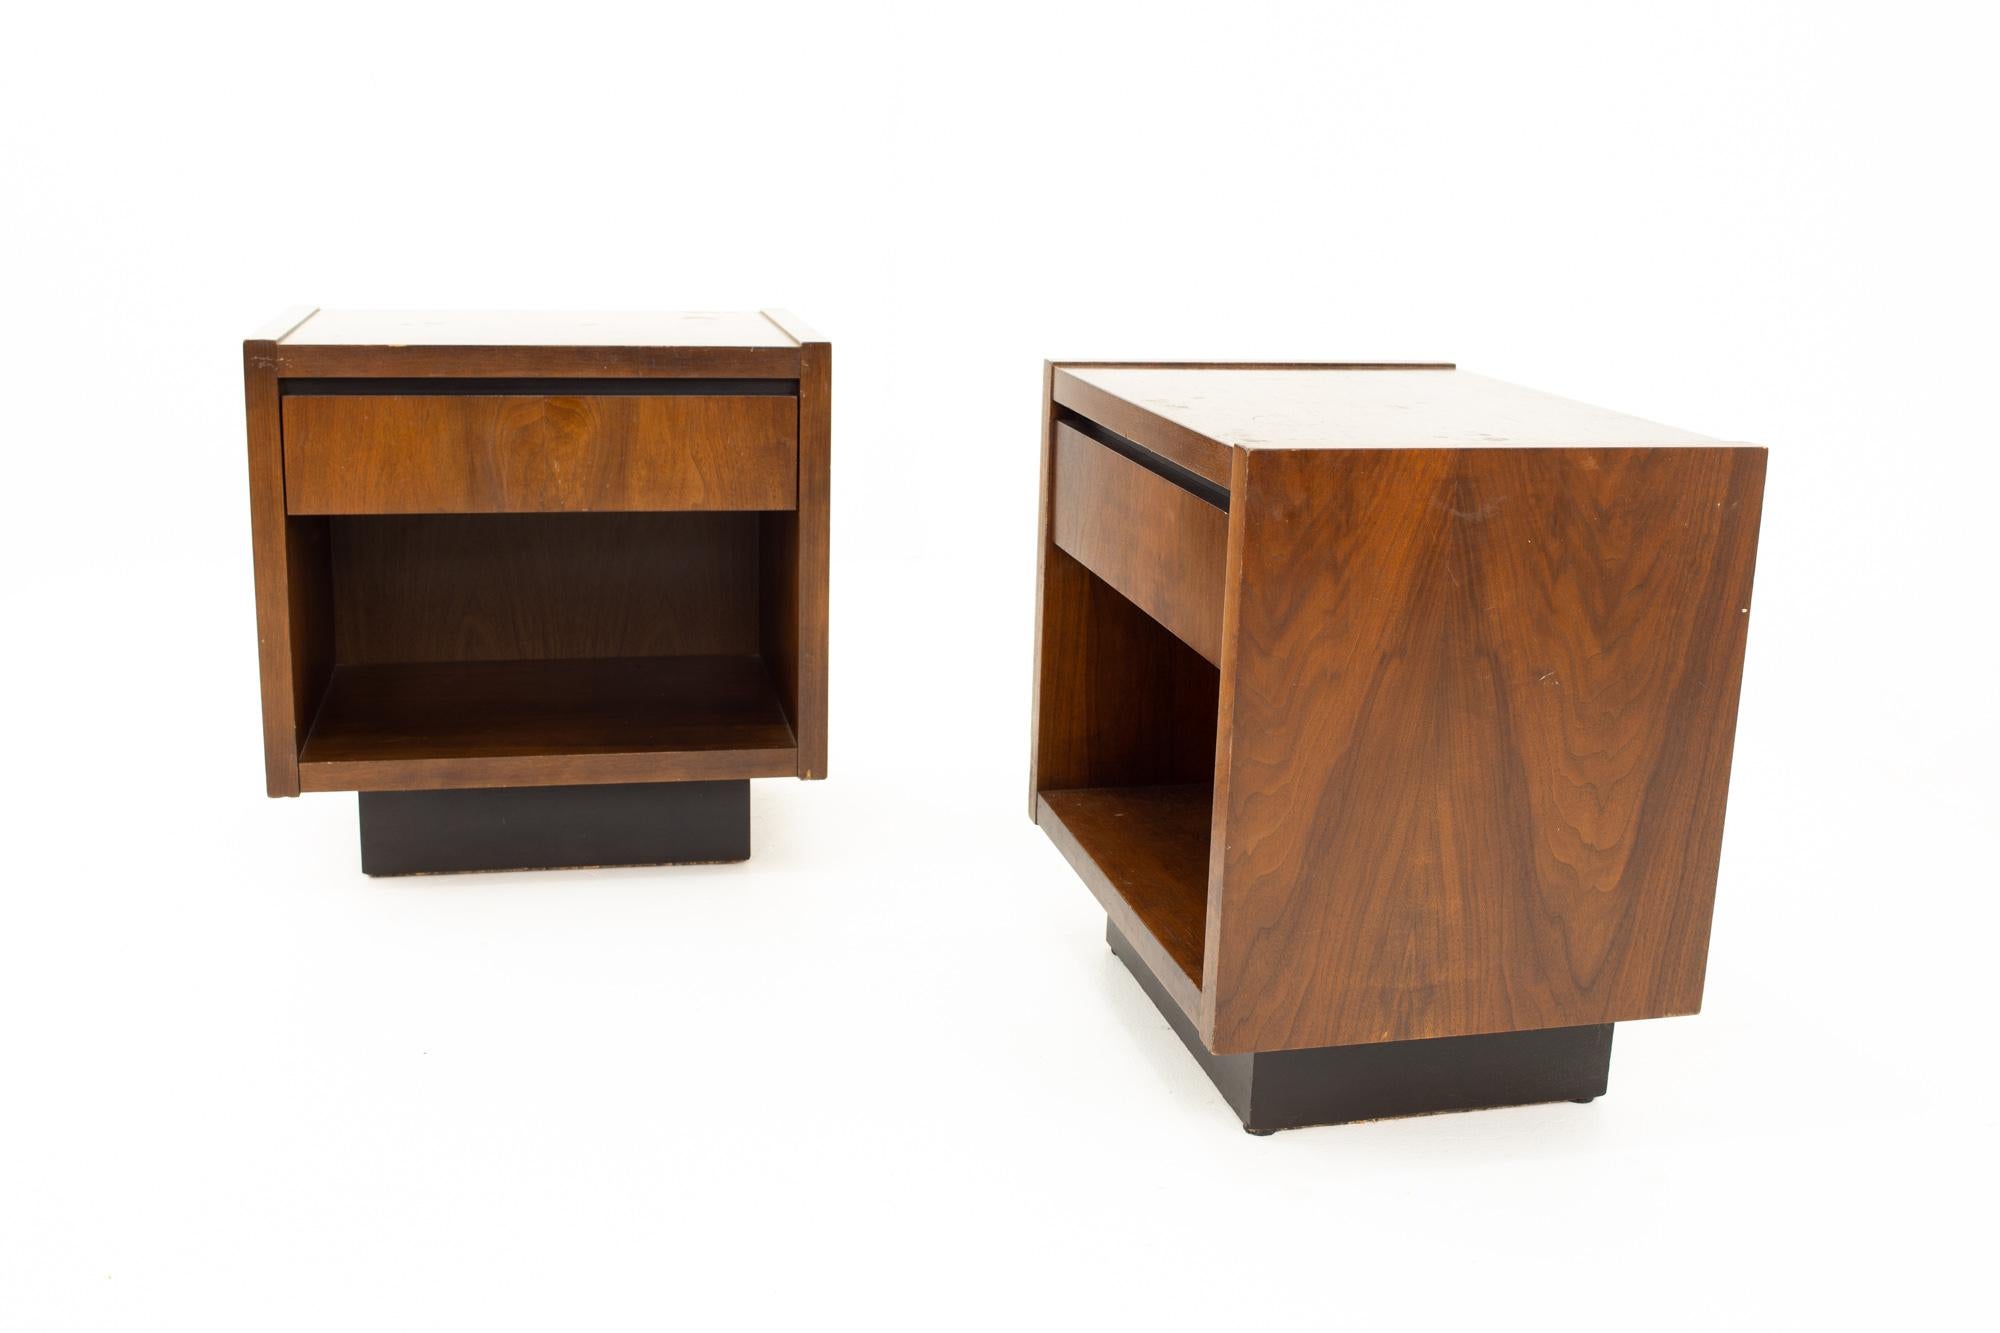 Lane mid century walnut plinth base platform nightstands - pair

Nightstand measures: 22 wide x 22 deep x 16 high

All pieces of furniture can be had in what we call restored vintage condition. That means the piece is restored upon purchase so